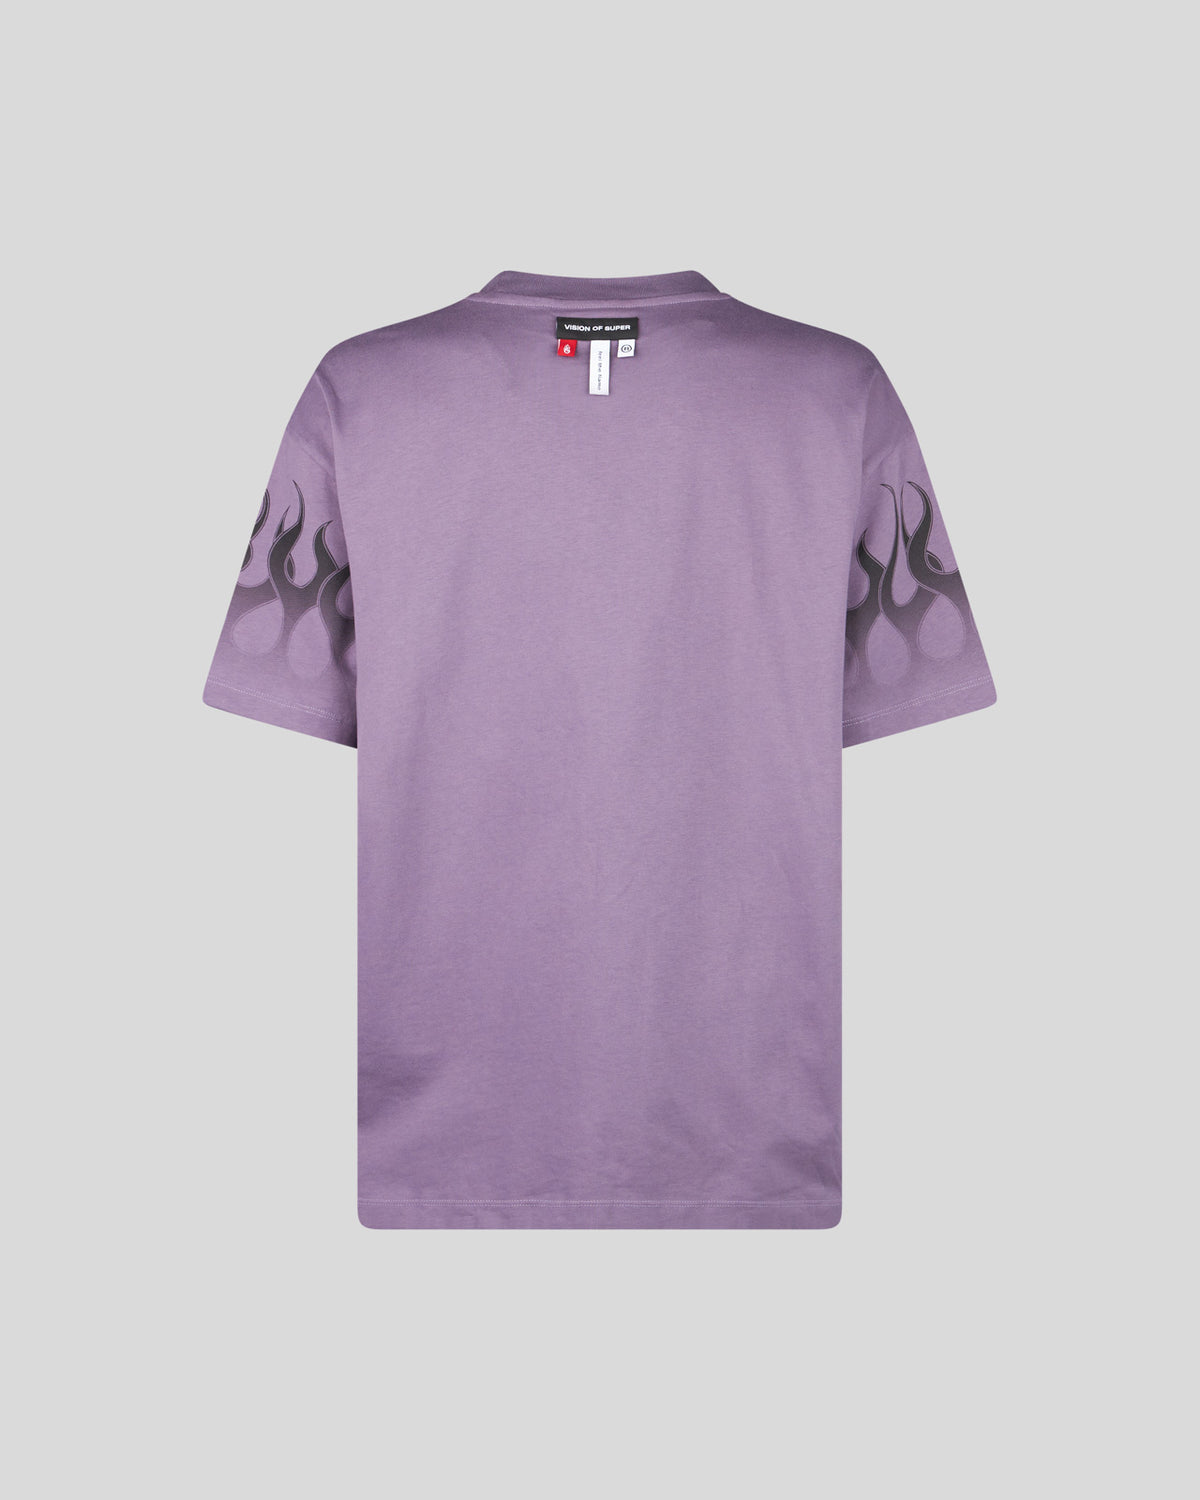 VISION OF SUPER PURPLE T-SHIRT WITH BLACK FLAMES